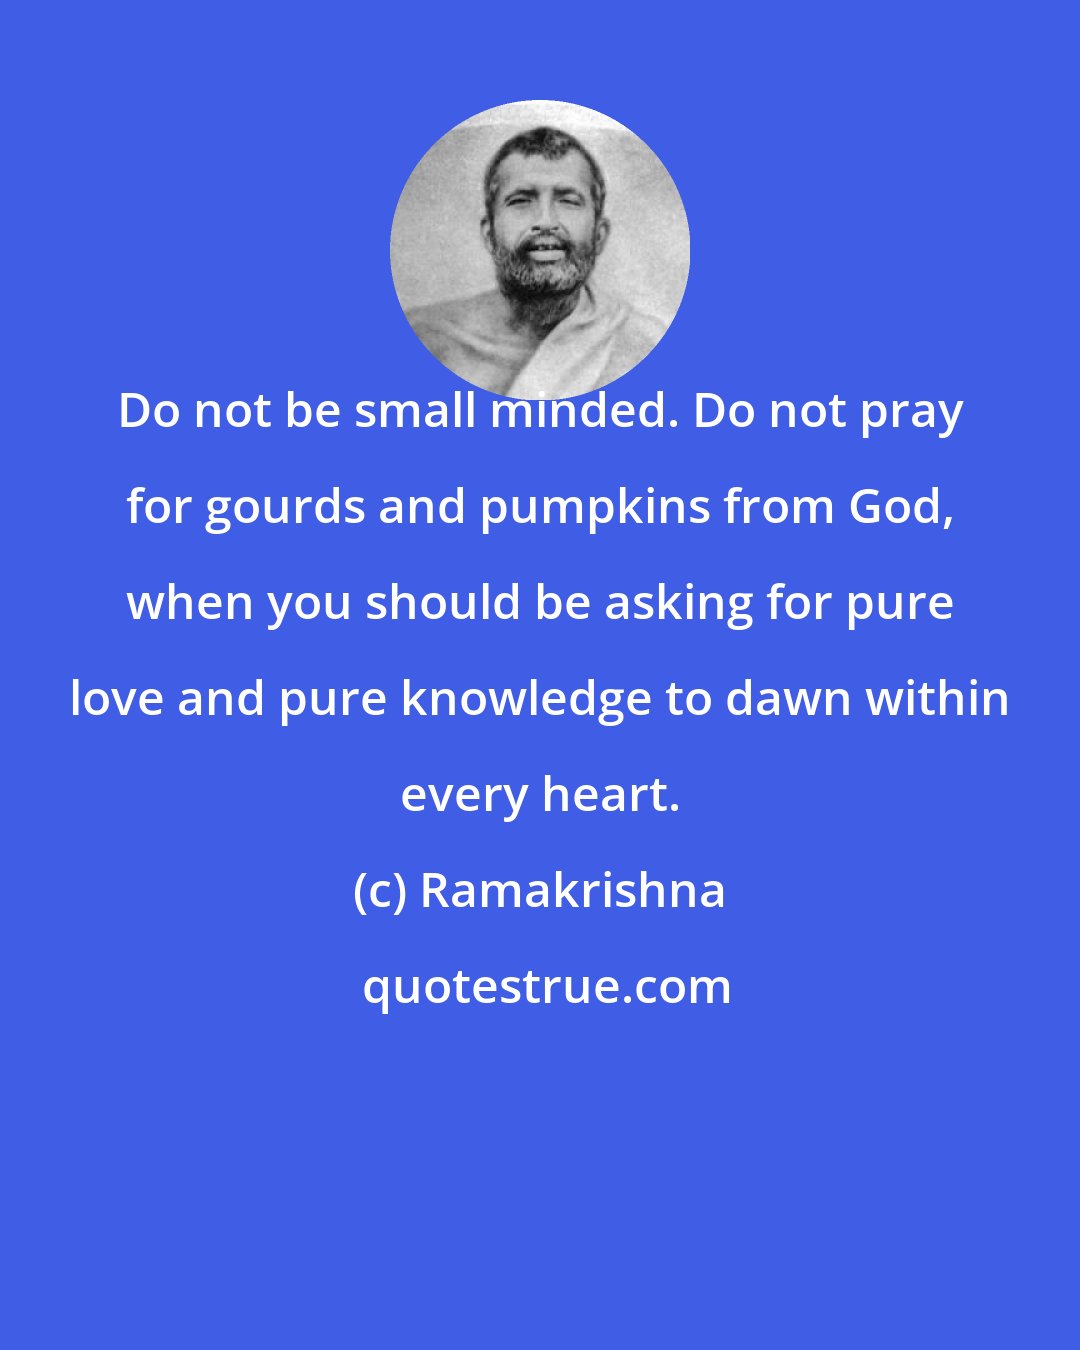 Ramakrishna: Do not be small minded. Do not pray for gourds and pumpkins from God, when you should be asking for pure love and pure knowledge to dawn within every heart.